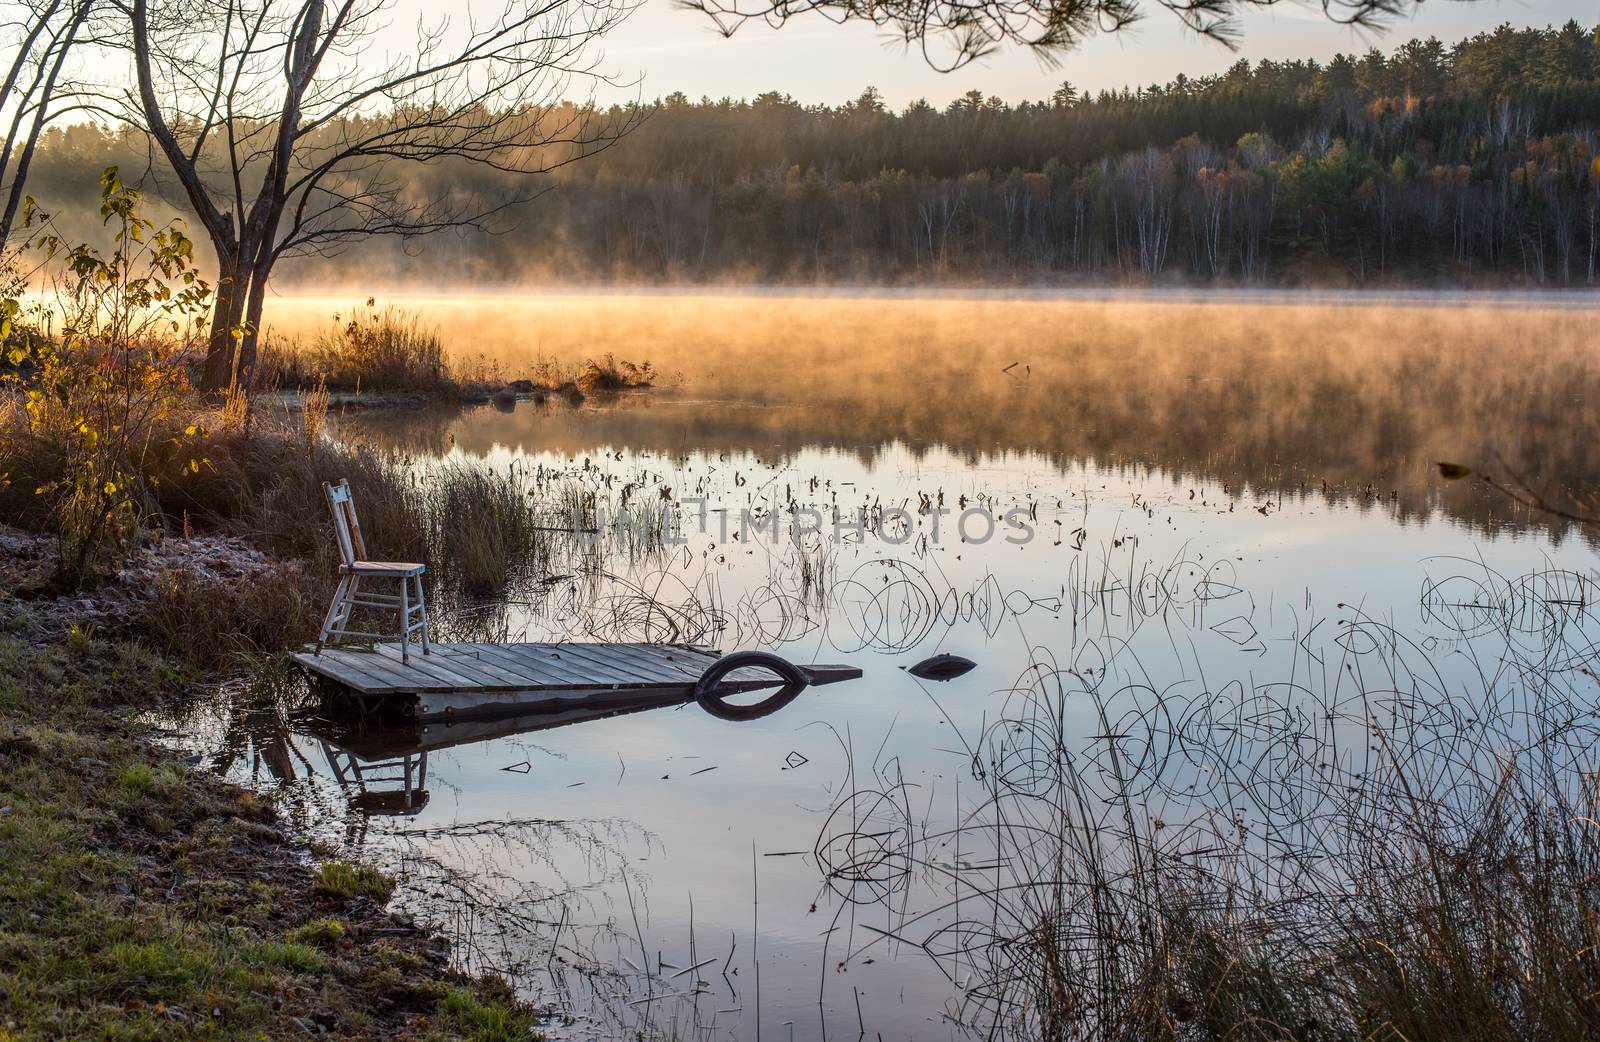 Morning sun reveals fog and a chair sits on a partially submerged dock beside a lake in Ontario, Canada.